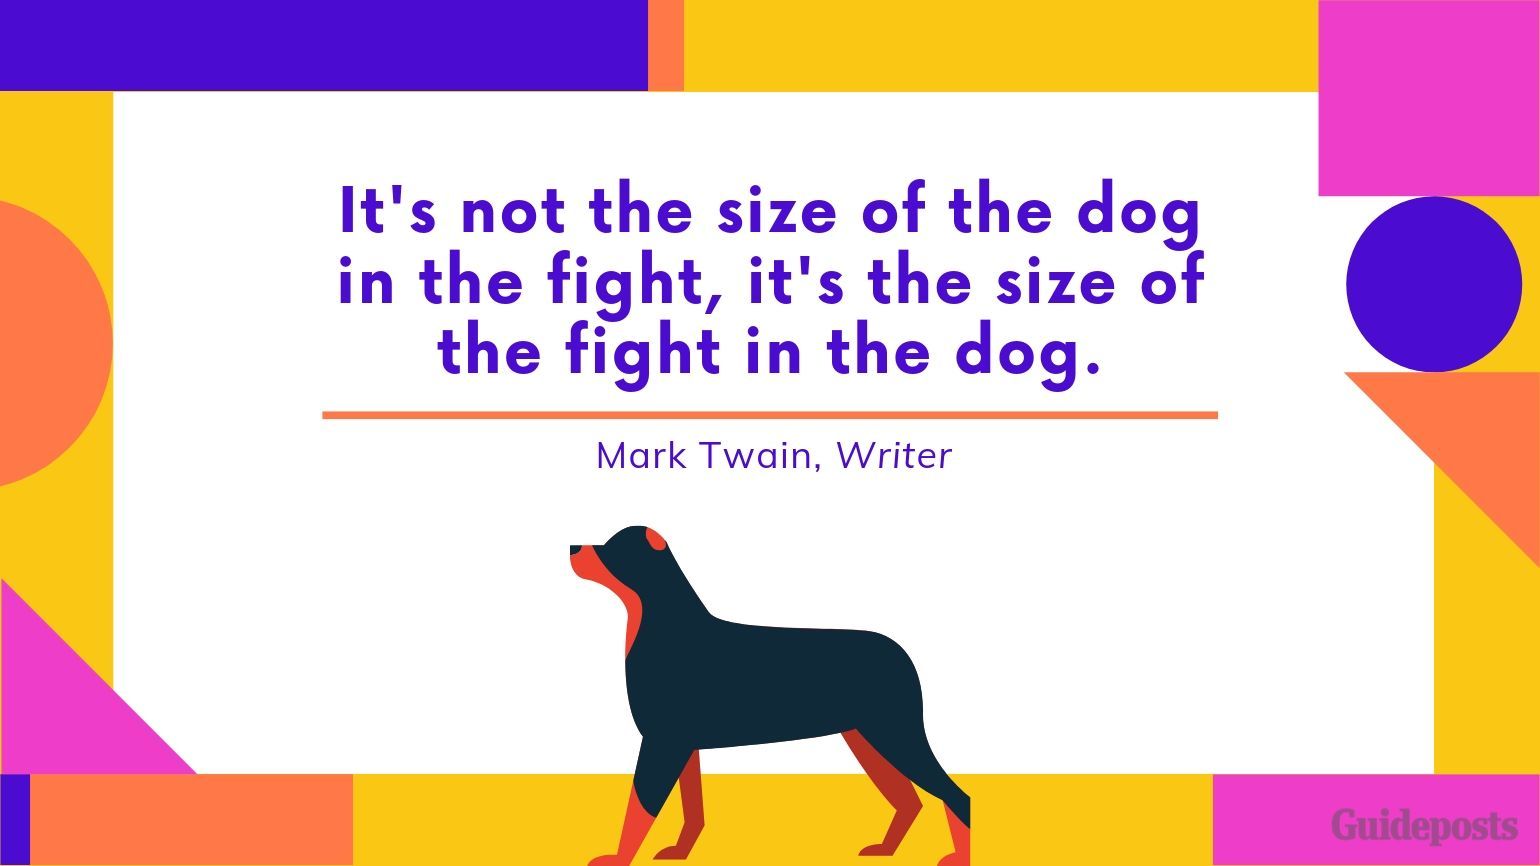 Sentimental Dog Quote: It's not the size of the dog in the fight, it's the size of the fight in the dog. —Mark Twain, Writer dog lover